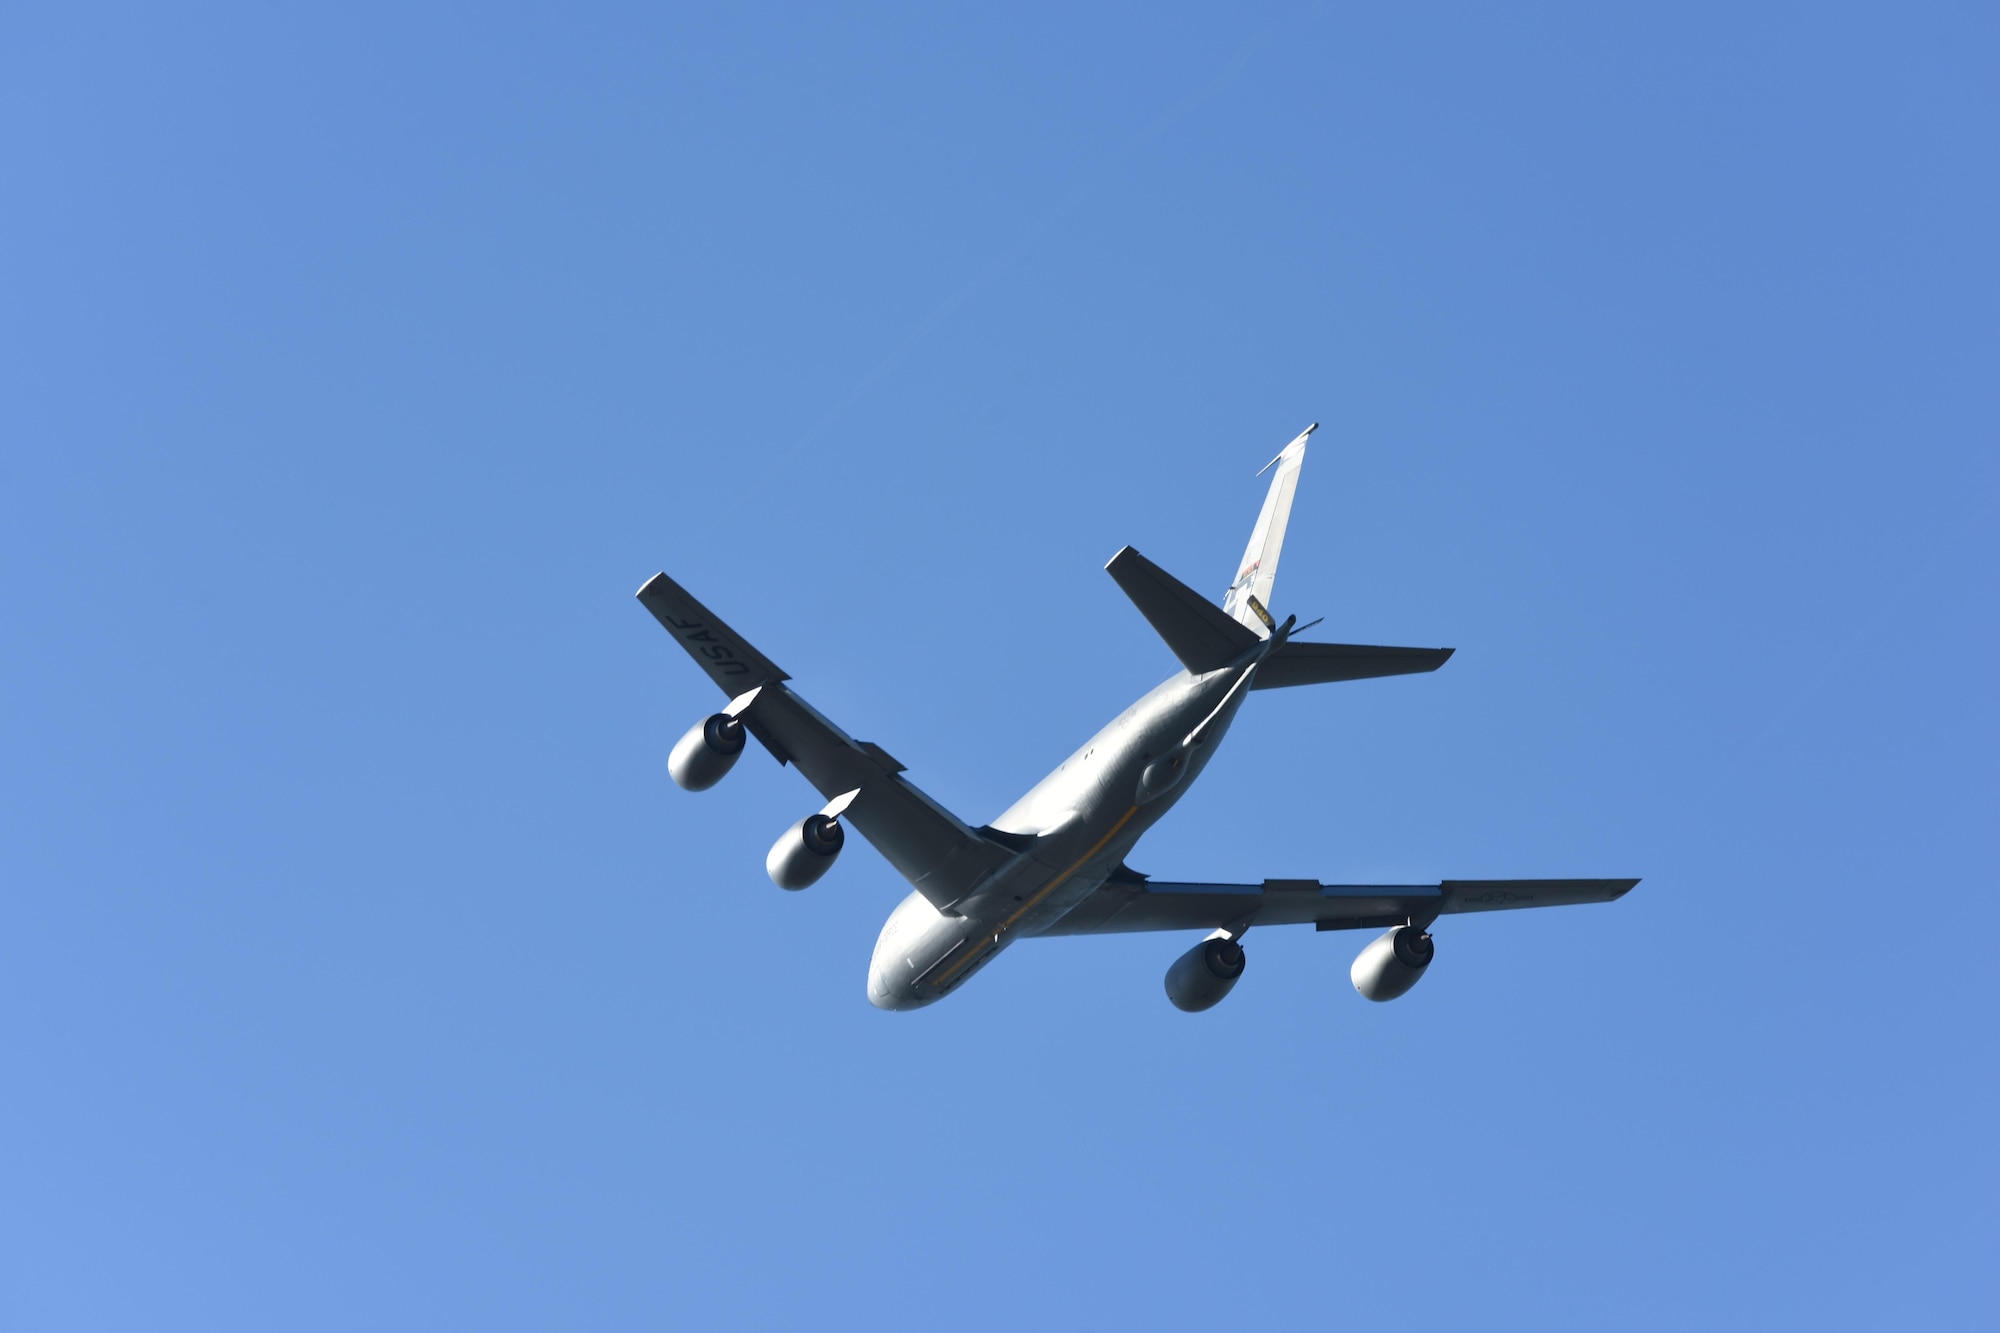 A KC-135 Stratotanker from the 314th Air Refueling Squadron flies overhead on Feb. 11, 2017 at Beale Air Force Base, California during a unit training assembly. The aircraft took off immediately following another KC-135 as part of a routine training sortie involving a two-ship aircraft formation. Between the two planes, they refueled eight F-15 Eagles that day from the 173rd Fighter Wing out of Kingsley Field Air National Guard Base, Oregon. (U.S. Air Force photo by Staff Sgt. Brenda Davis).